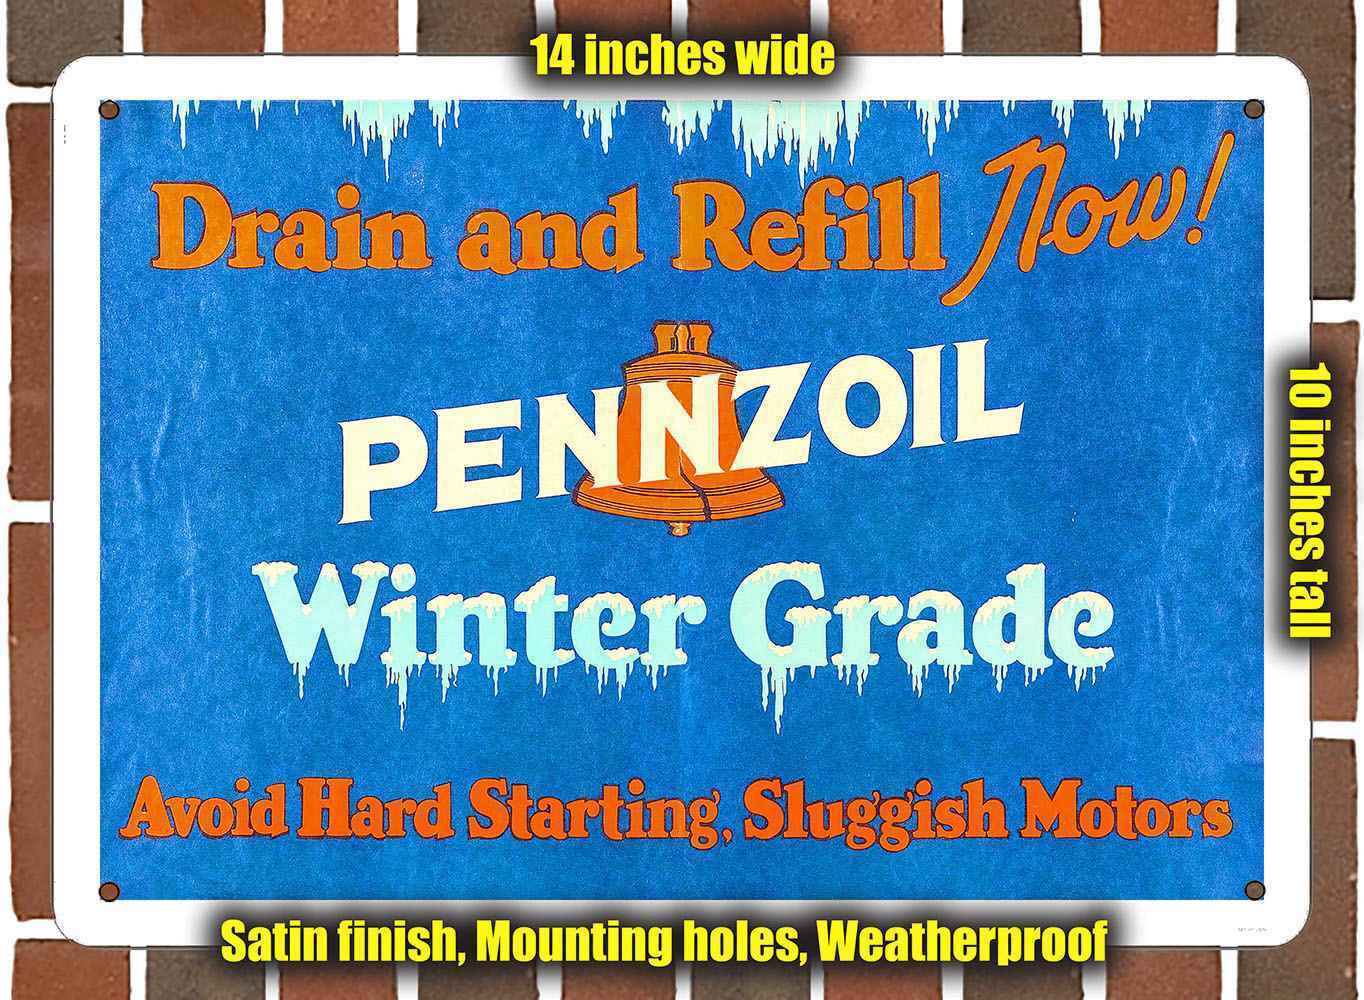 Metal Sign - 1946 Pennzoil Winter Grade Motor Oil- 10x14 inches